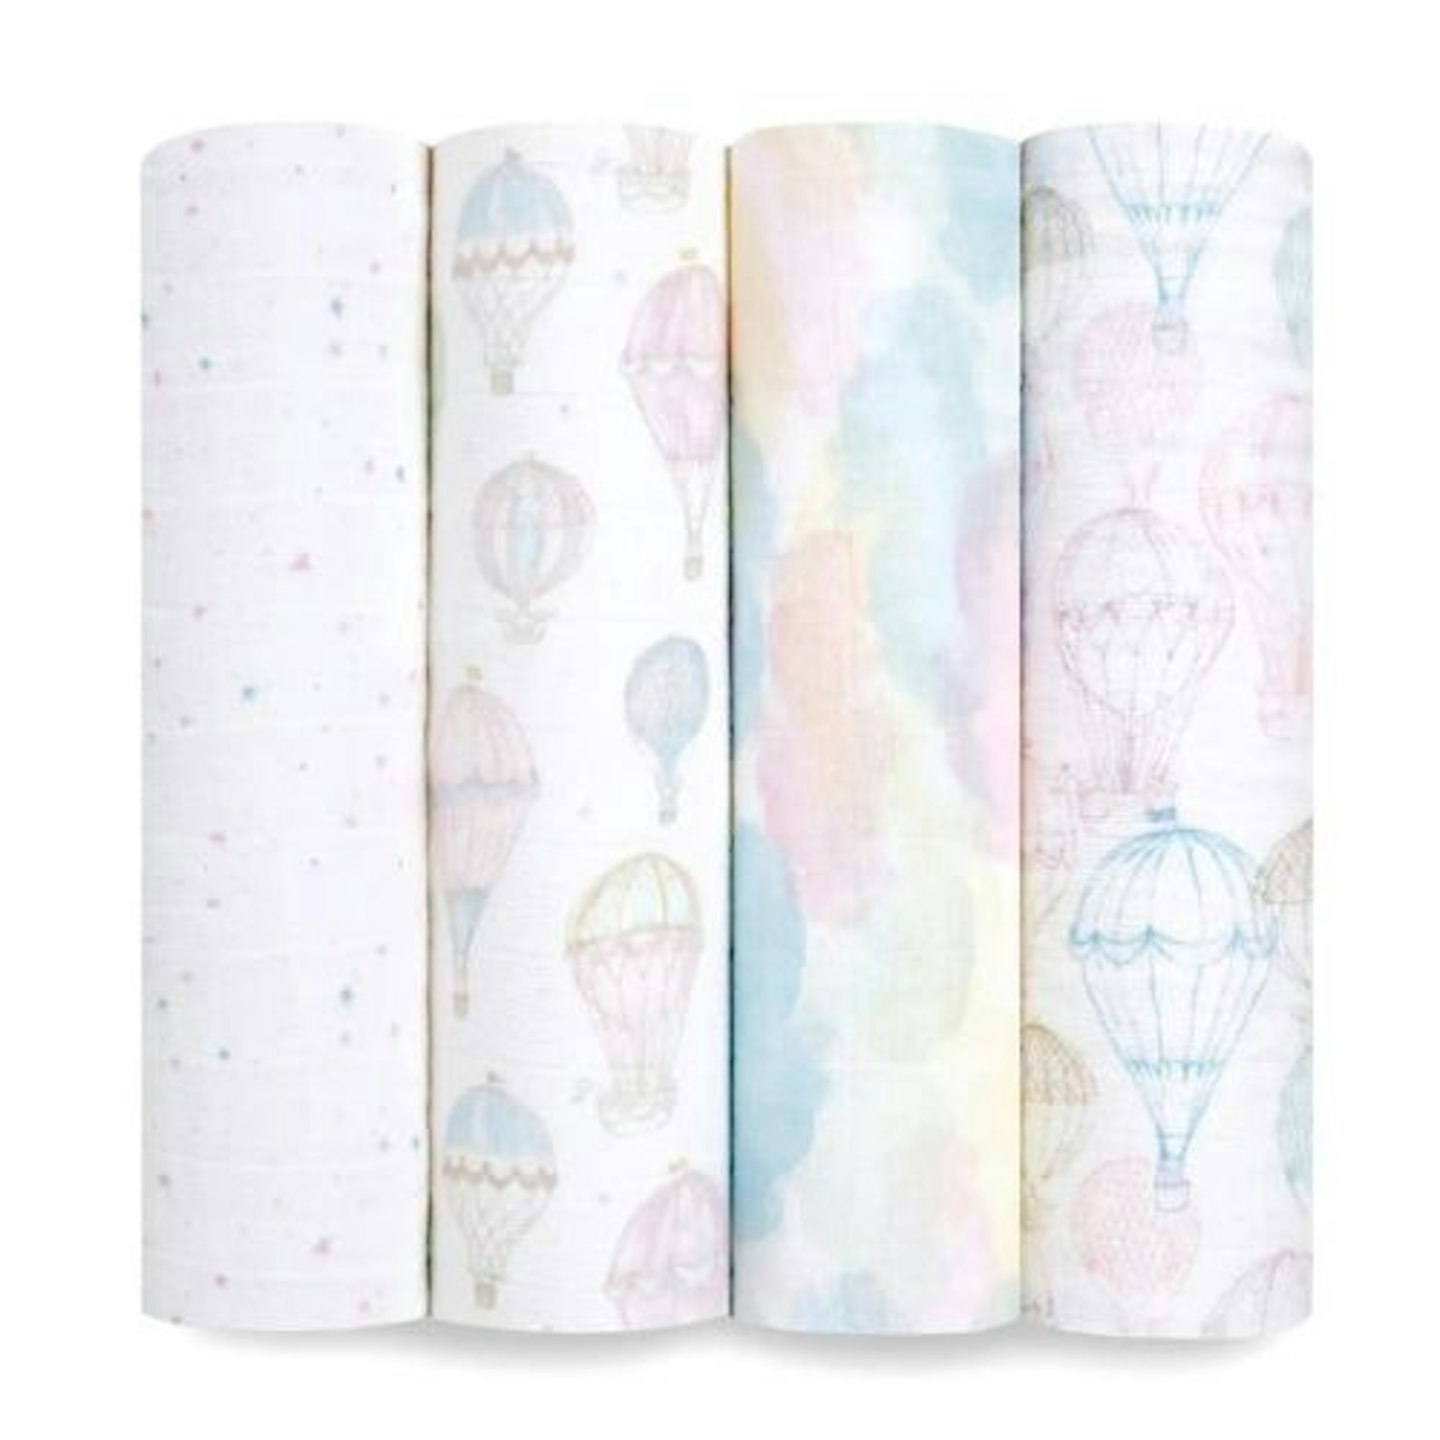 aden + anais baby products -  ORGANIC COTTON SWADDLES 4 PACK